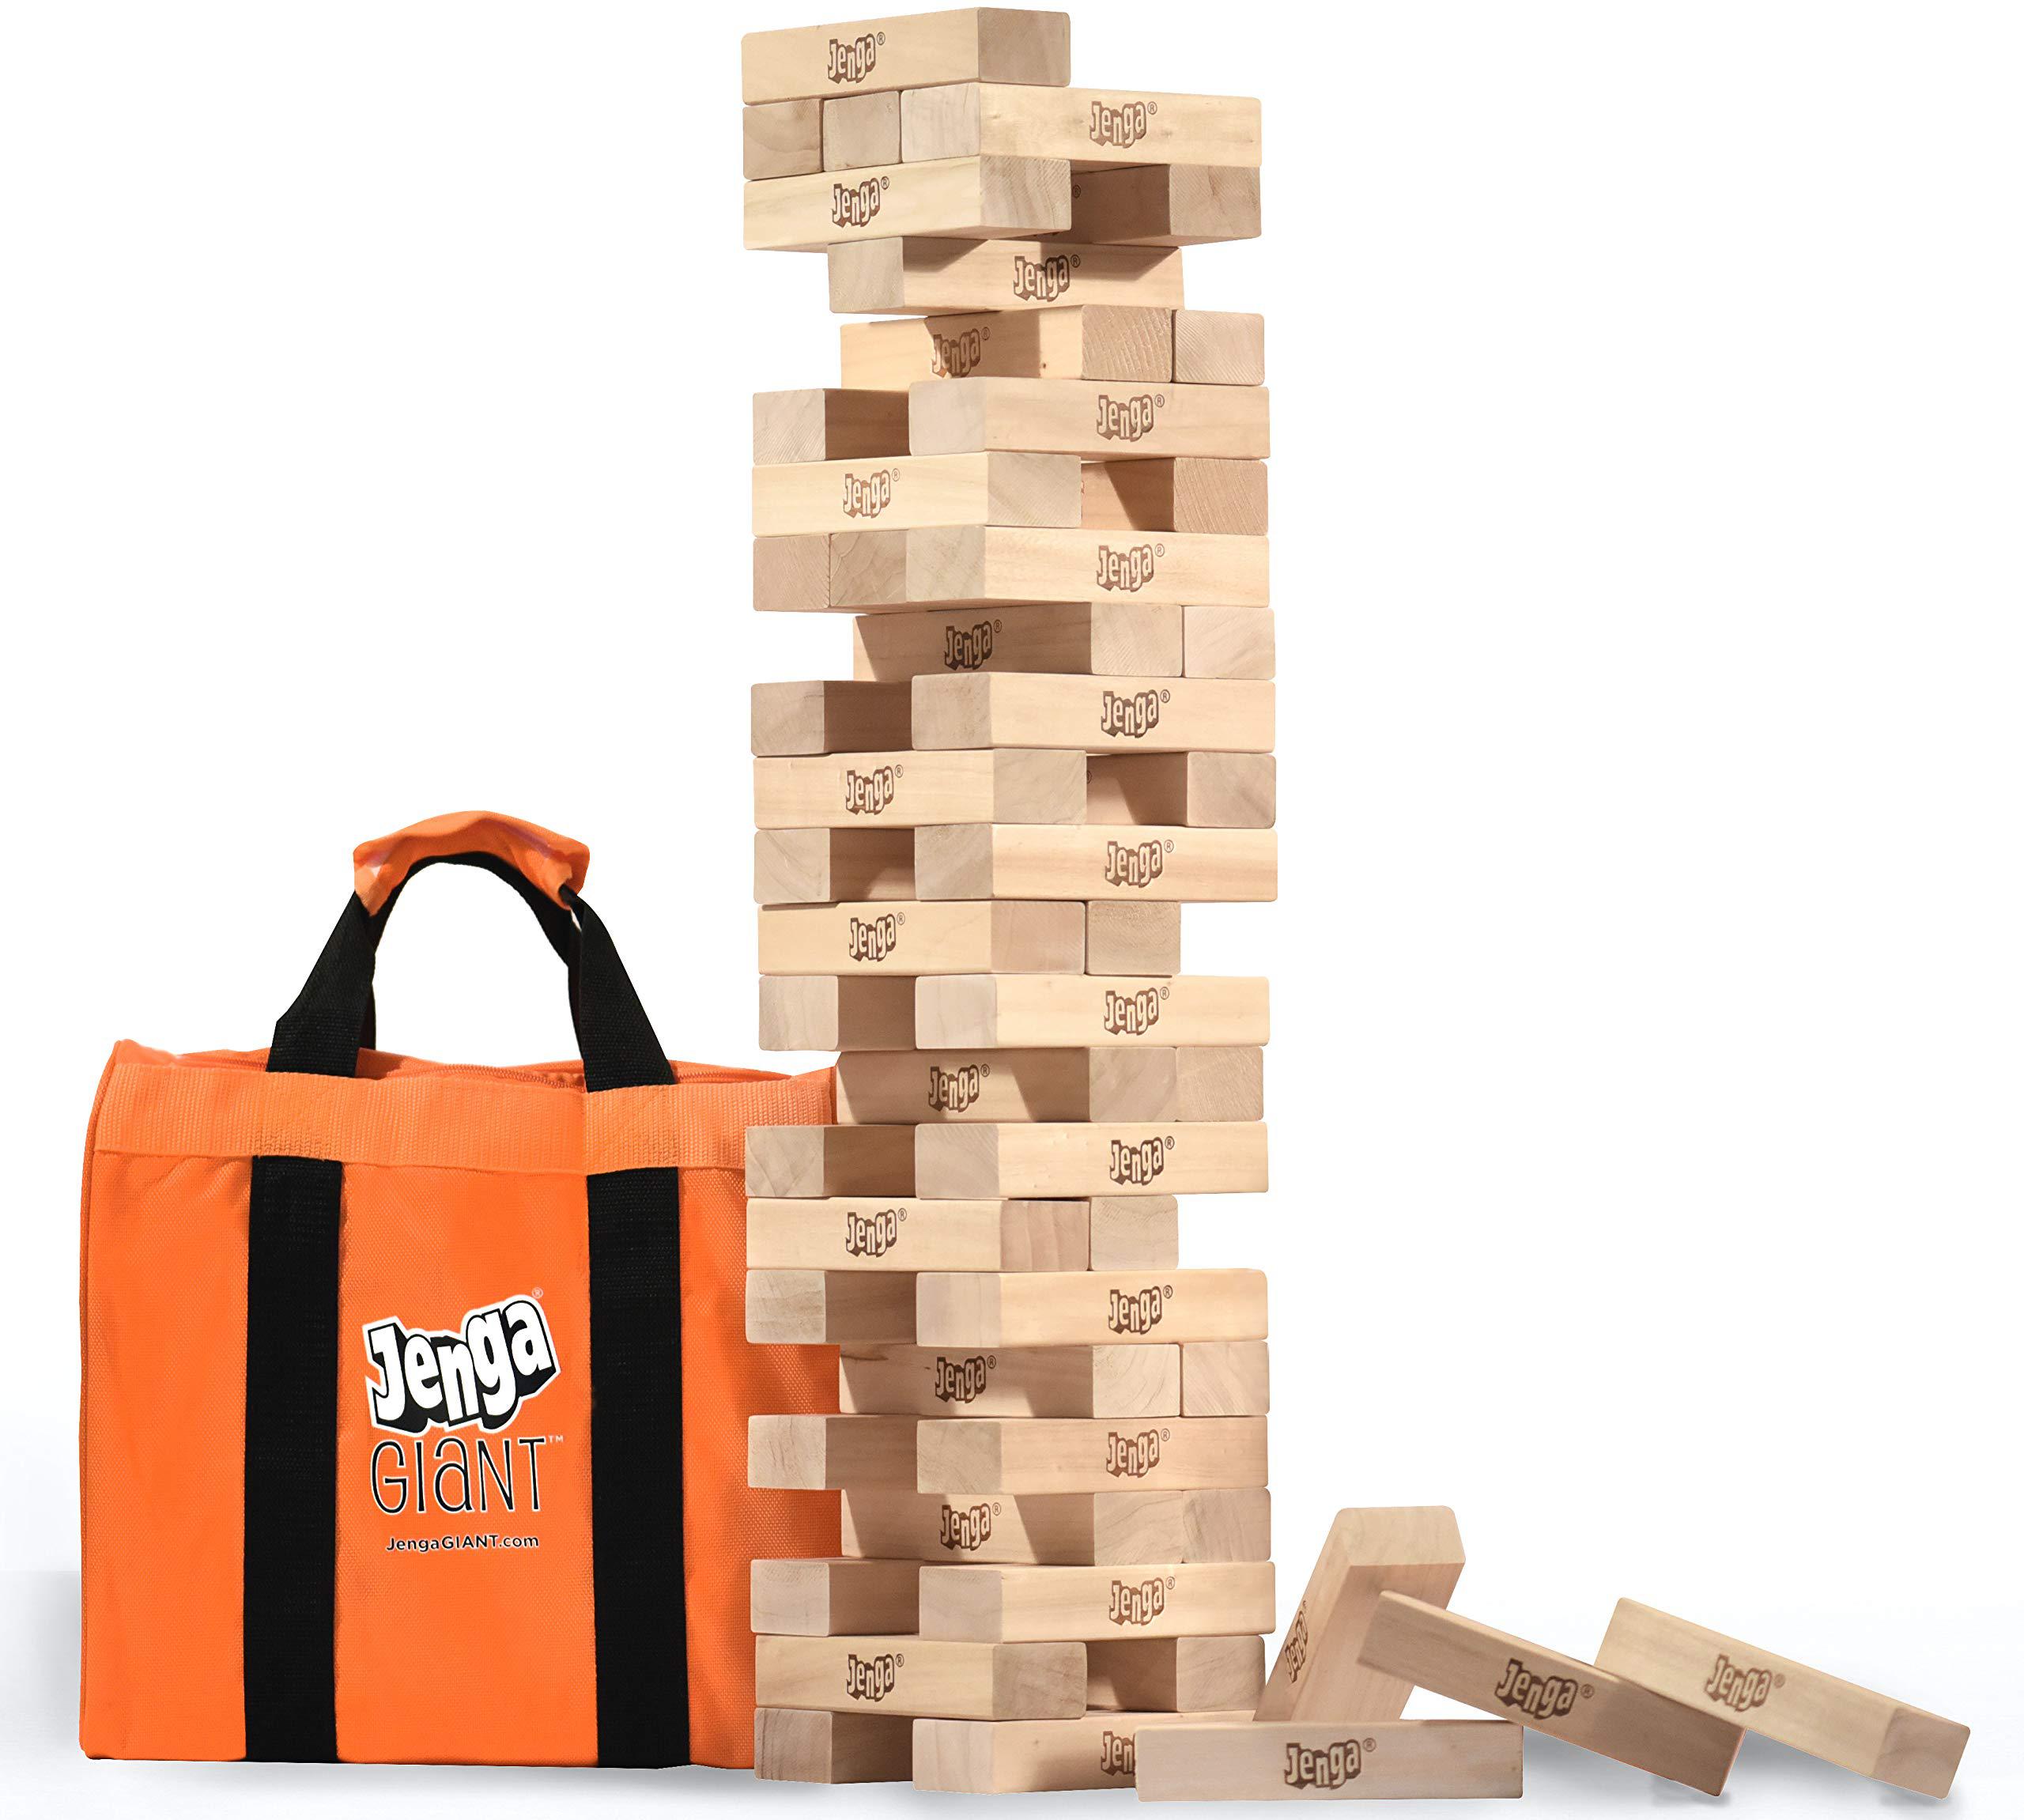 jenga official giant js6 - extra large size stacks to over 4 feet, includes heavy-duty carry bag, premium hardwood blocks, sp